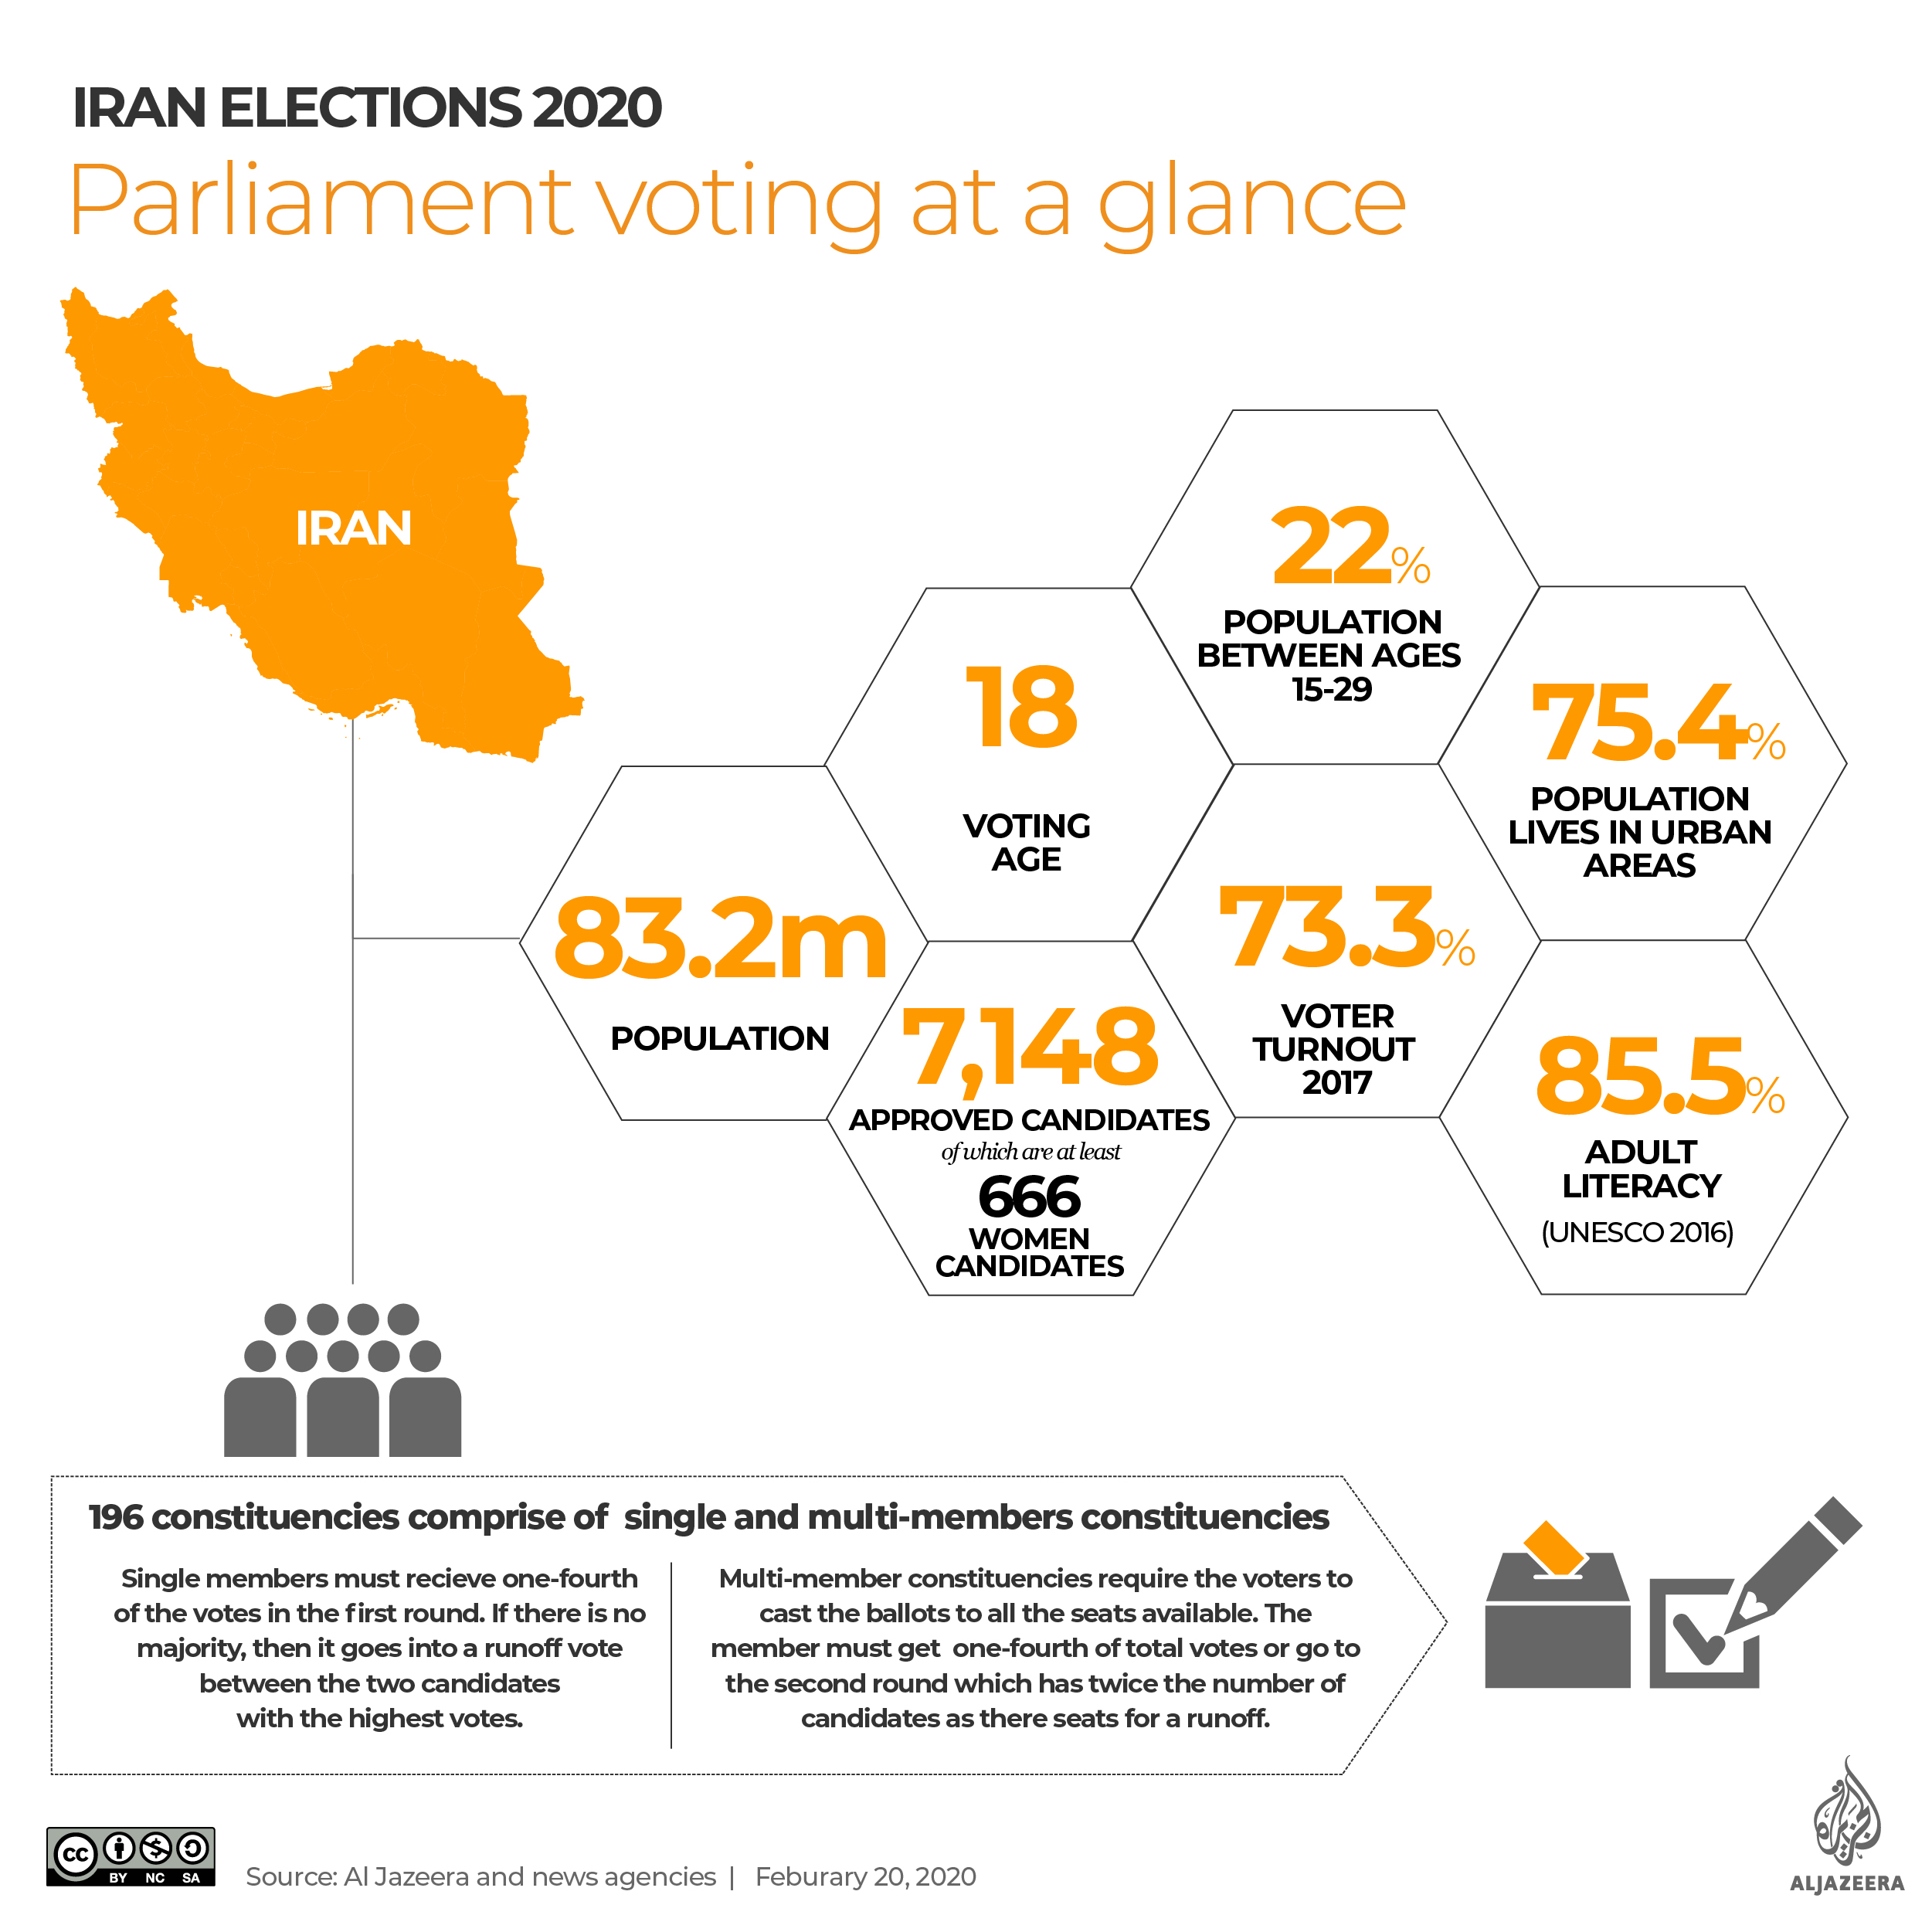 INTERACTIVE: Iran parliamentary elections 2020 -Voting at a glance